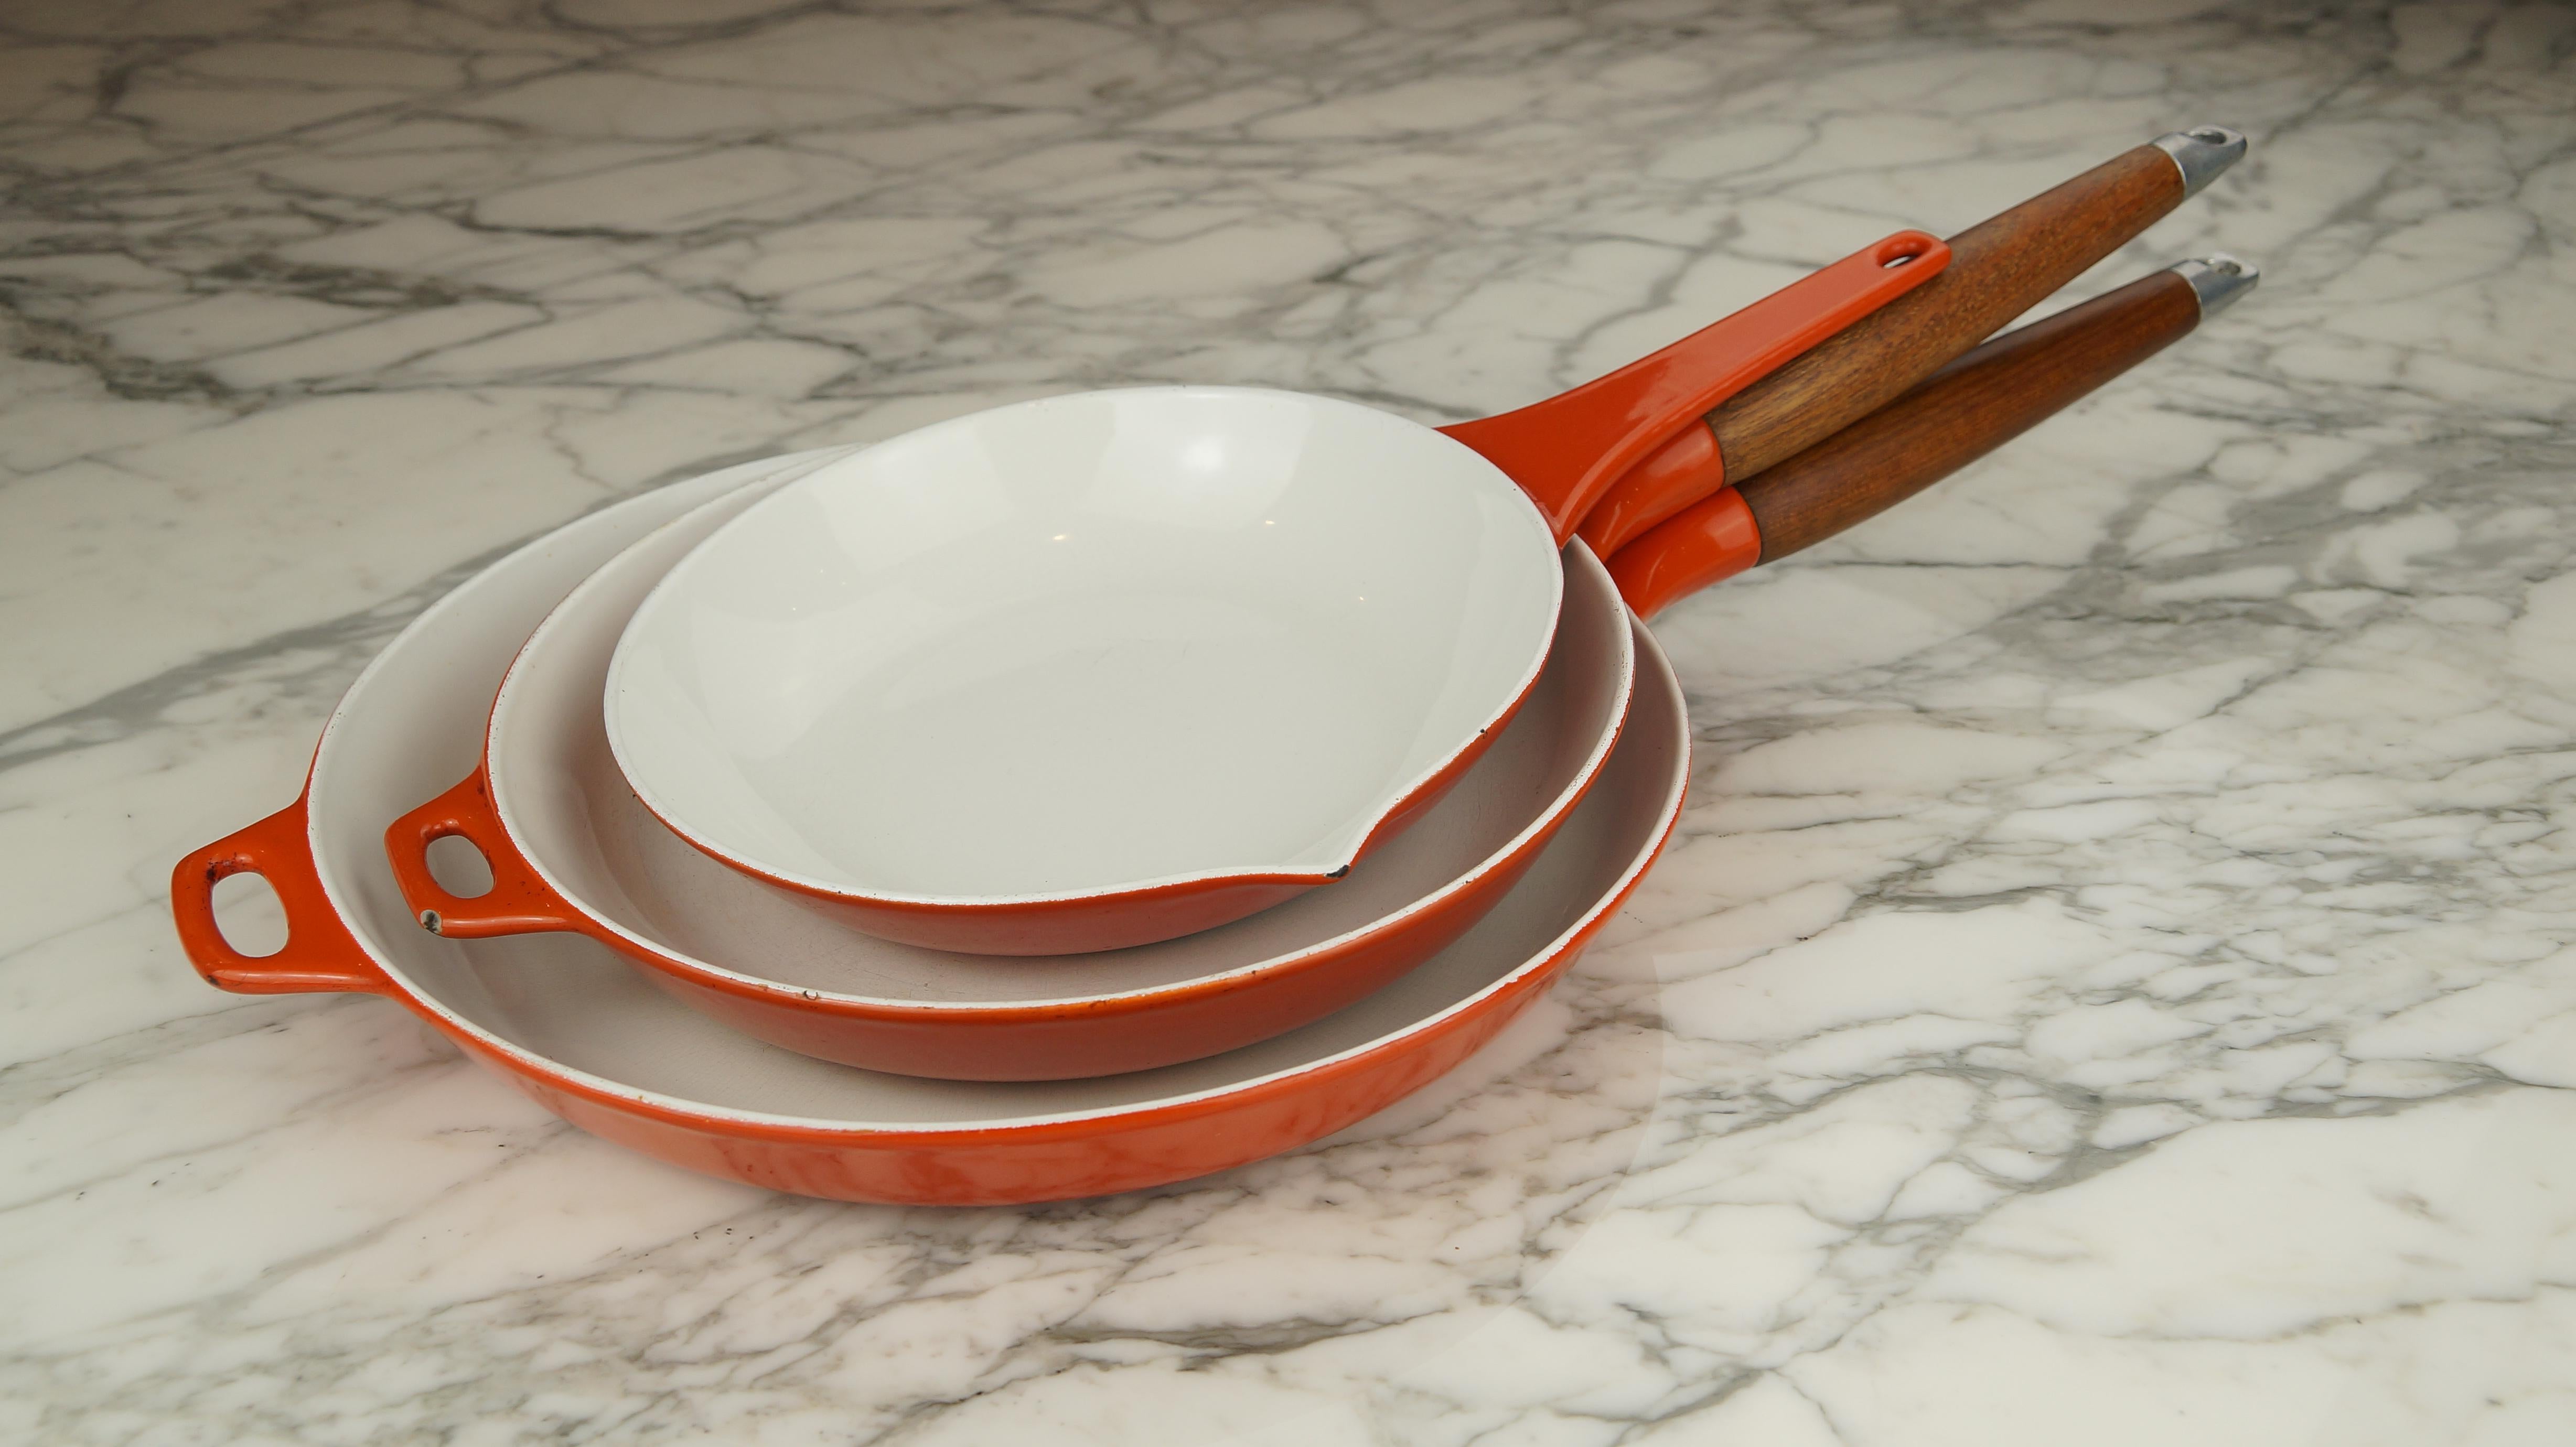 Rare set of vintage Danish Copco orange and white enamel cast iron pans with teak wood handles - designed by Michael Lax.

A stunning trio of enamel cast iron pans or skillets designed by Michael Lax for Copco Denmark in the 1960s.

These will